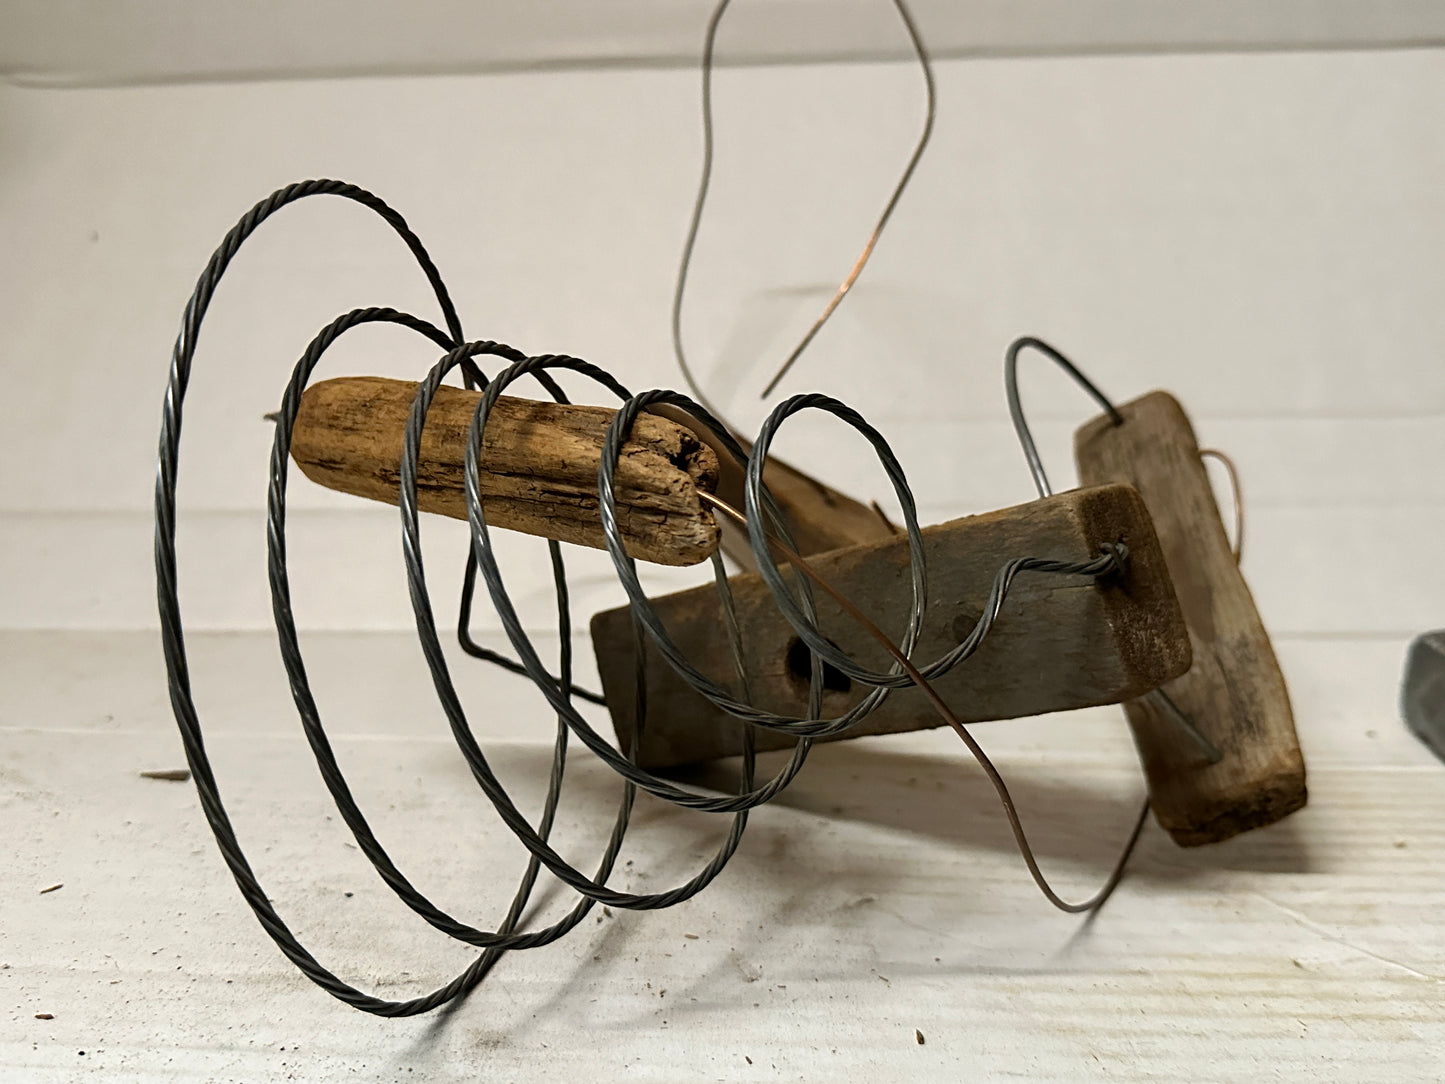 Signed Roger Selchow Wood and Metal Wire Sculpture: "Selchow # 6"